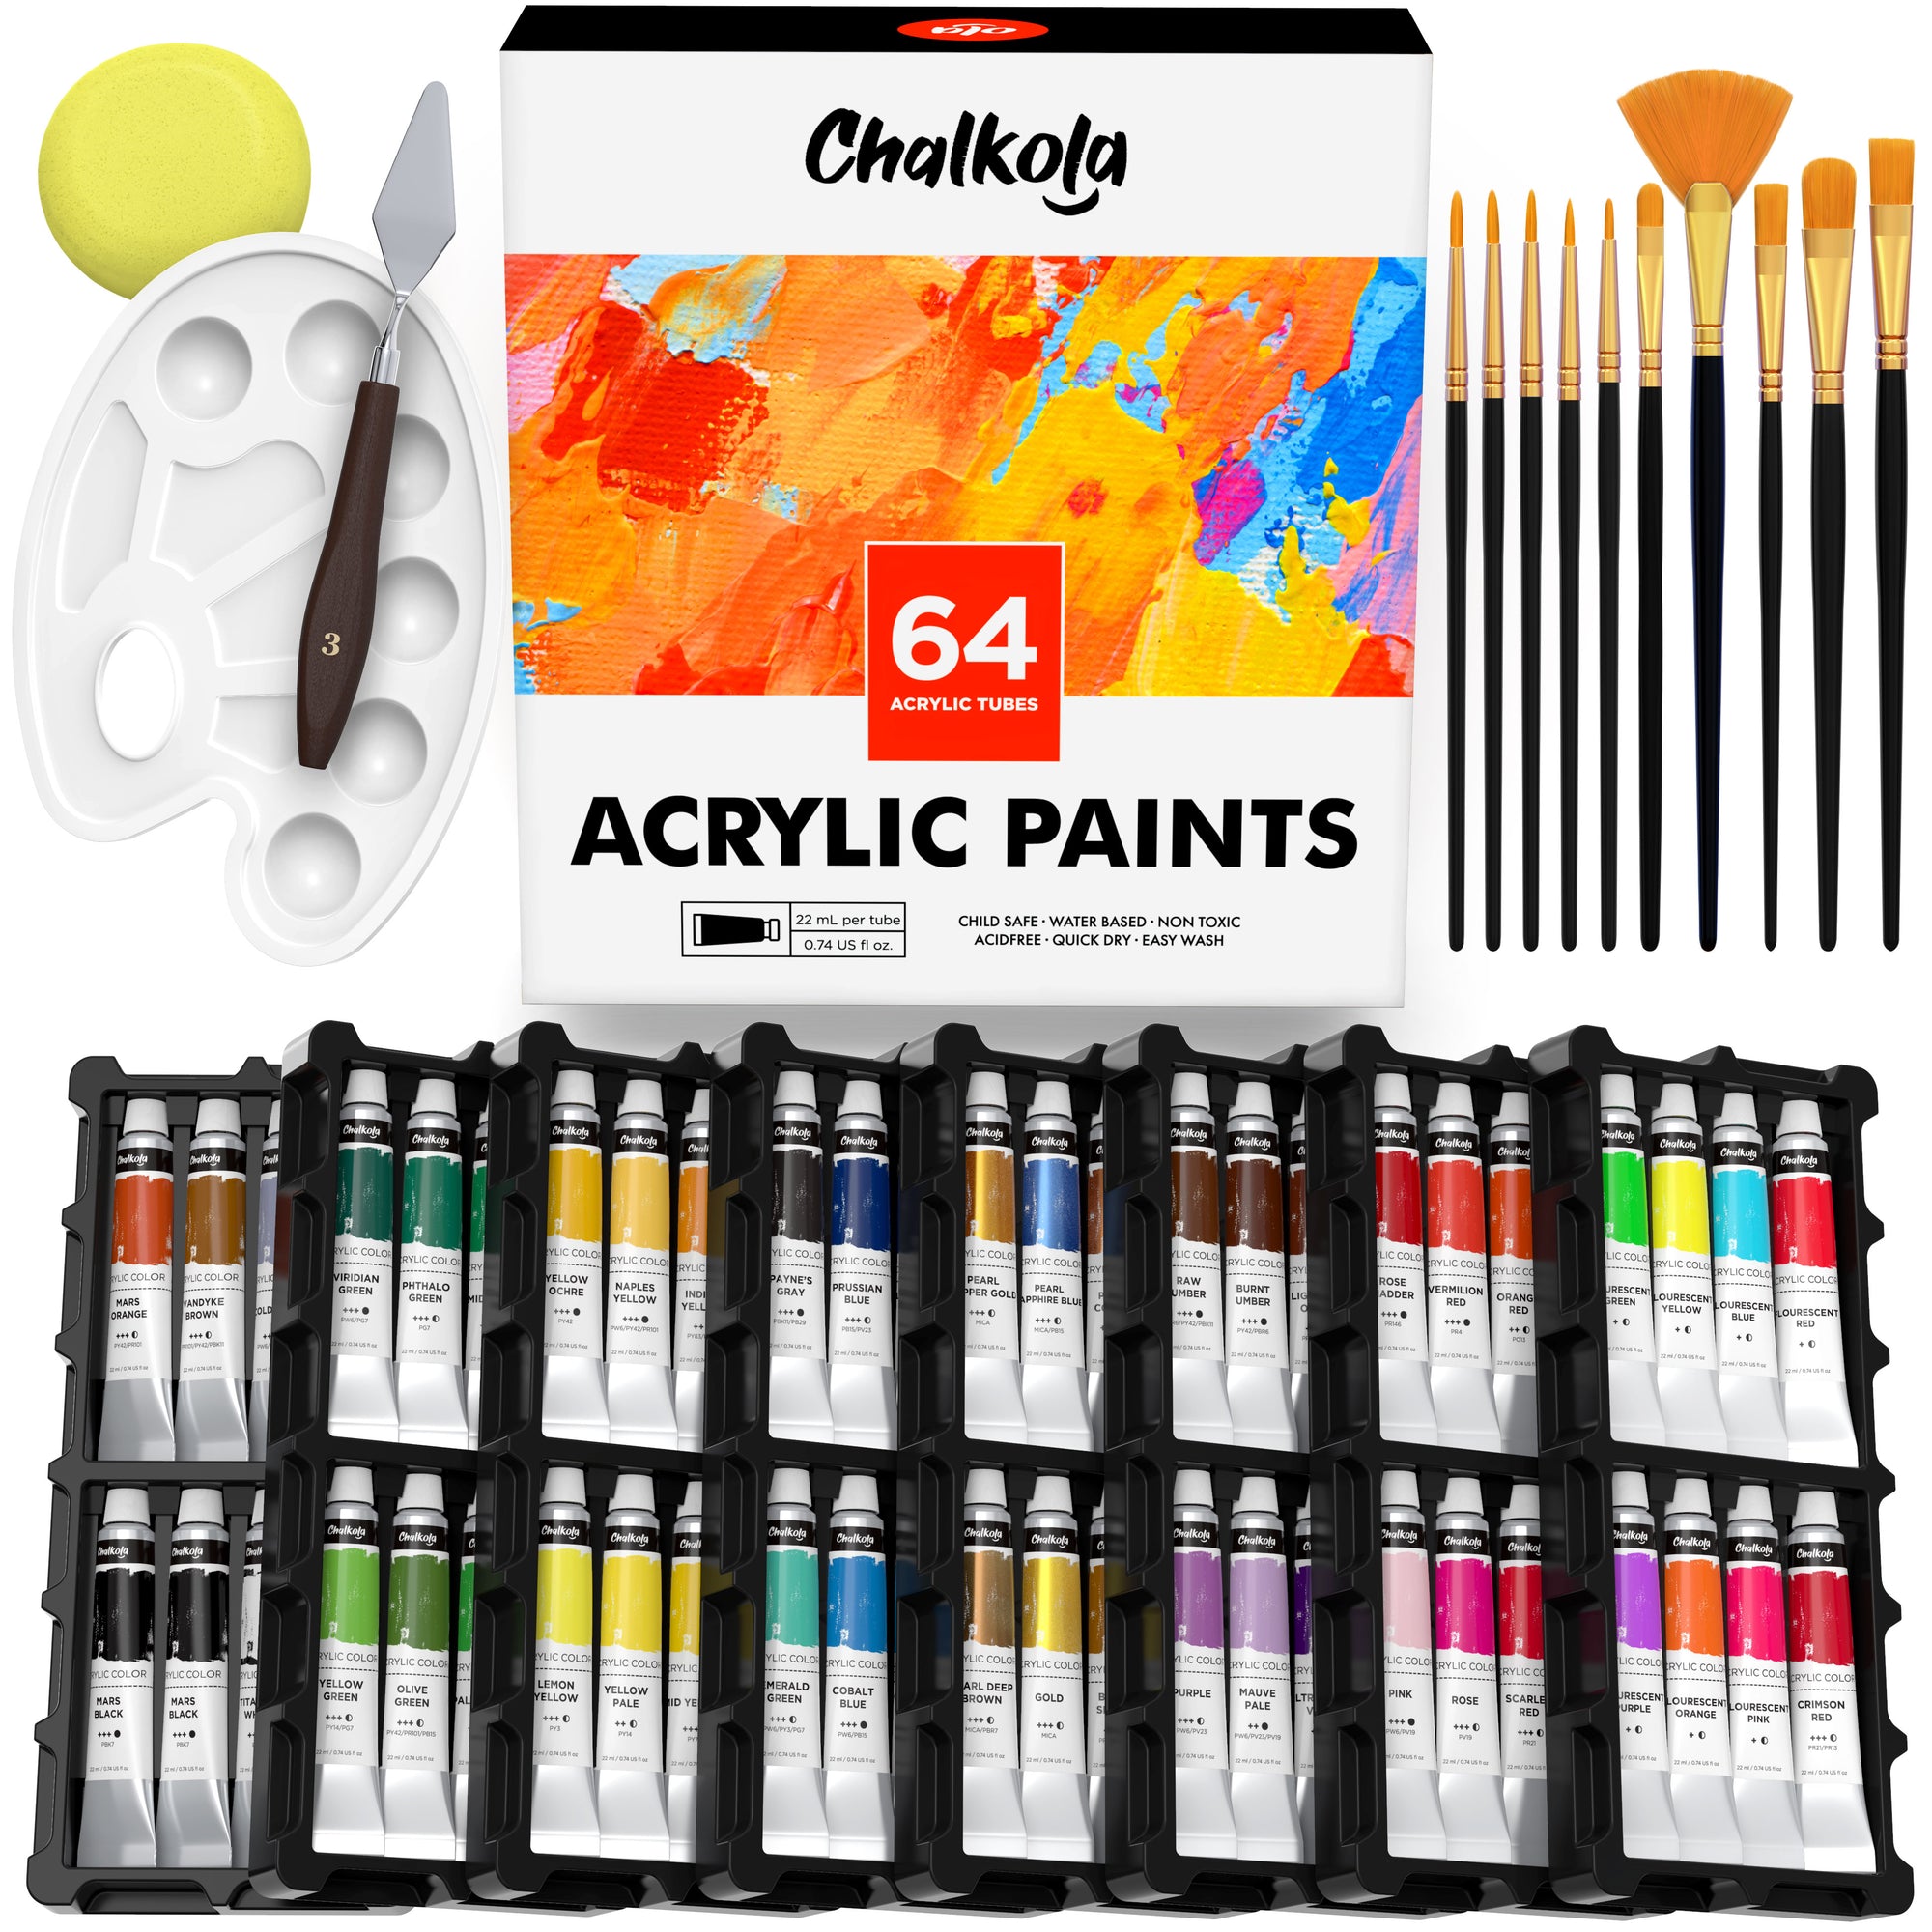 koseibal Art Paint Set with 18 Acrylic Paints, 8 Brushes, 4 Stretched  Canvas, 1Wooden Easel, Etc, Premium Painting Supplies Kit for Students,  Artists